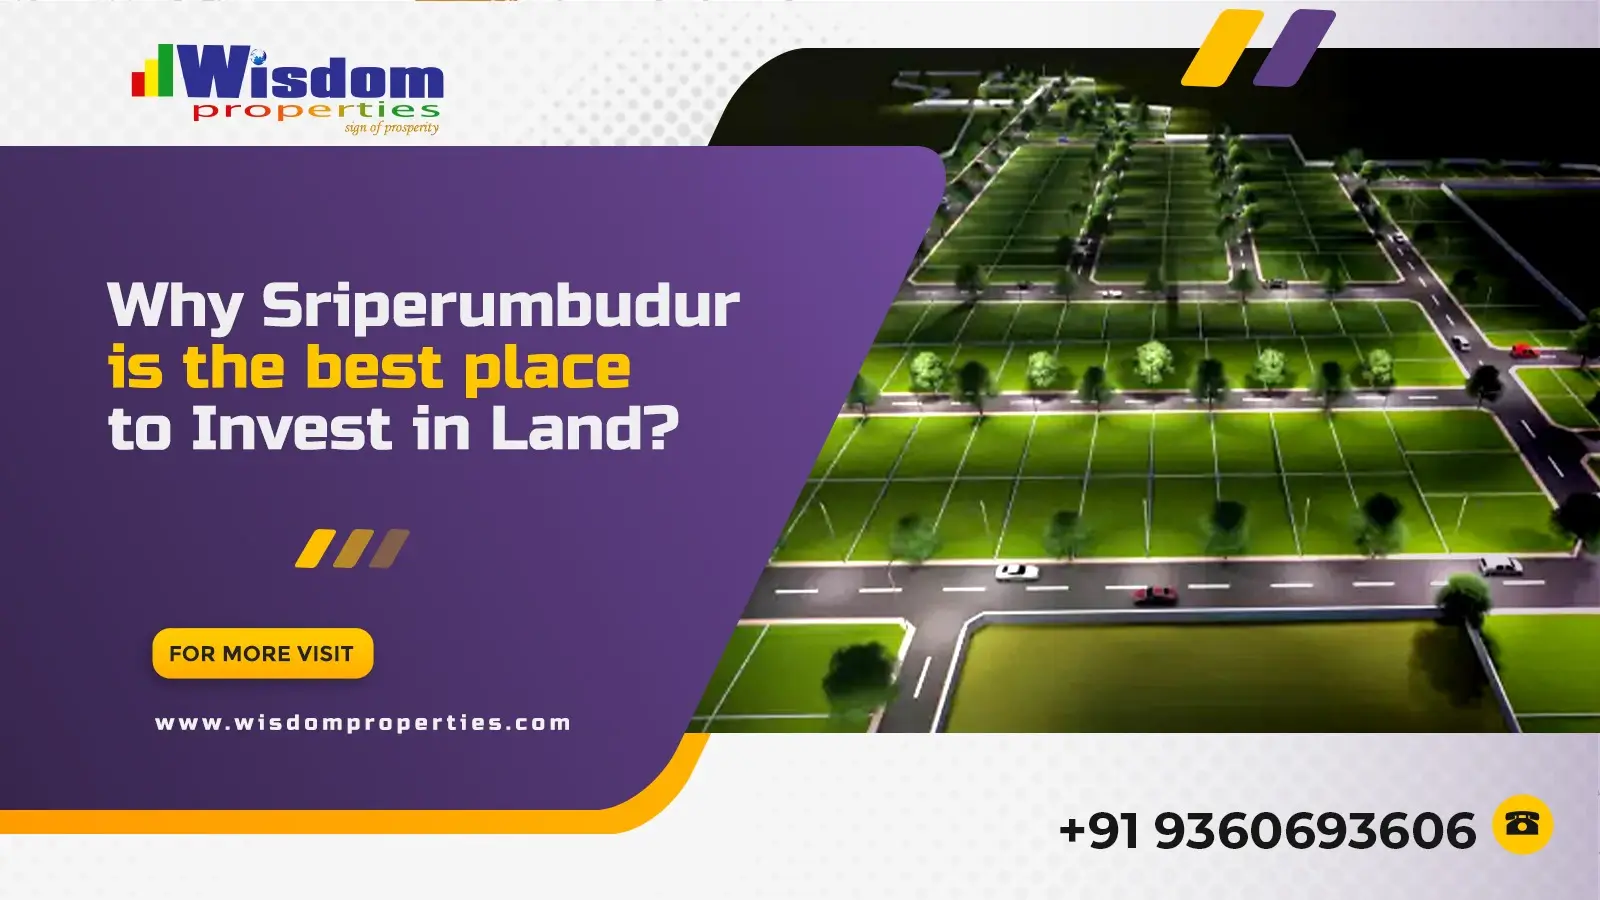 Why Sriperumbudur is the best place to Invest in Land?